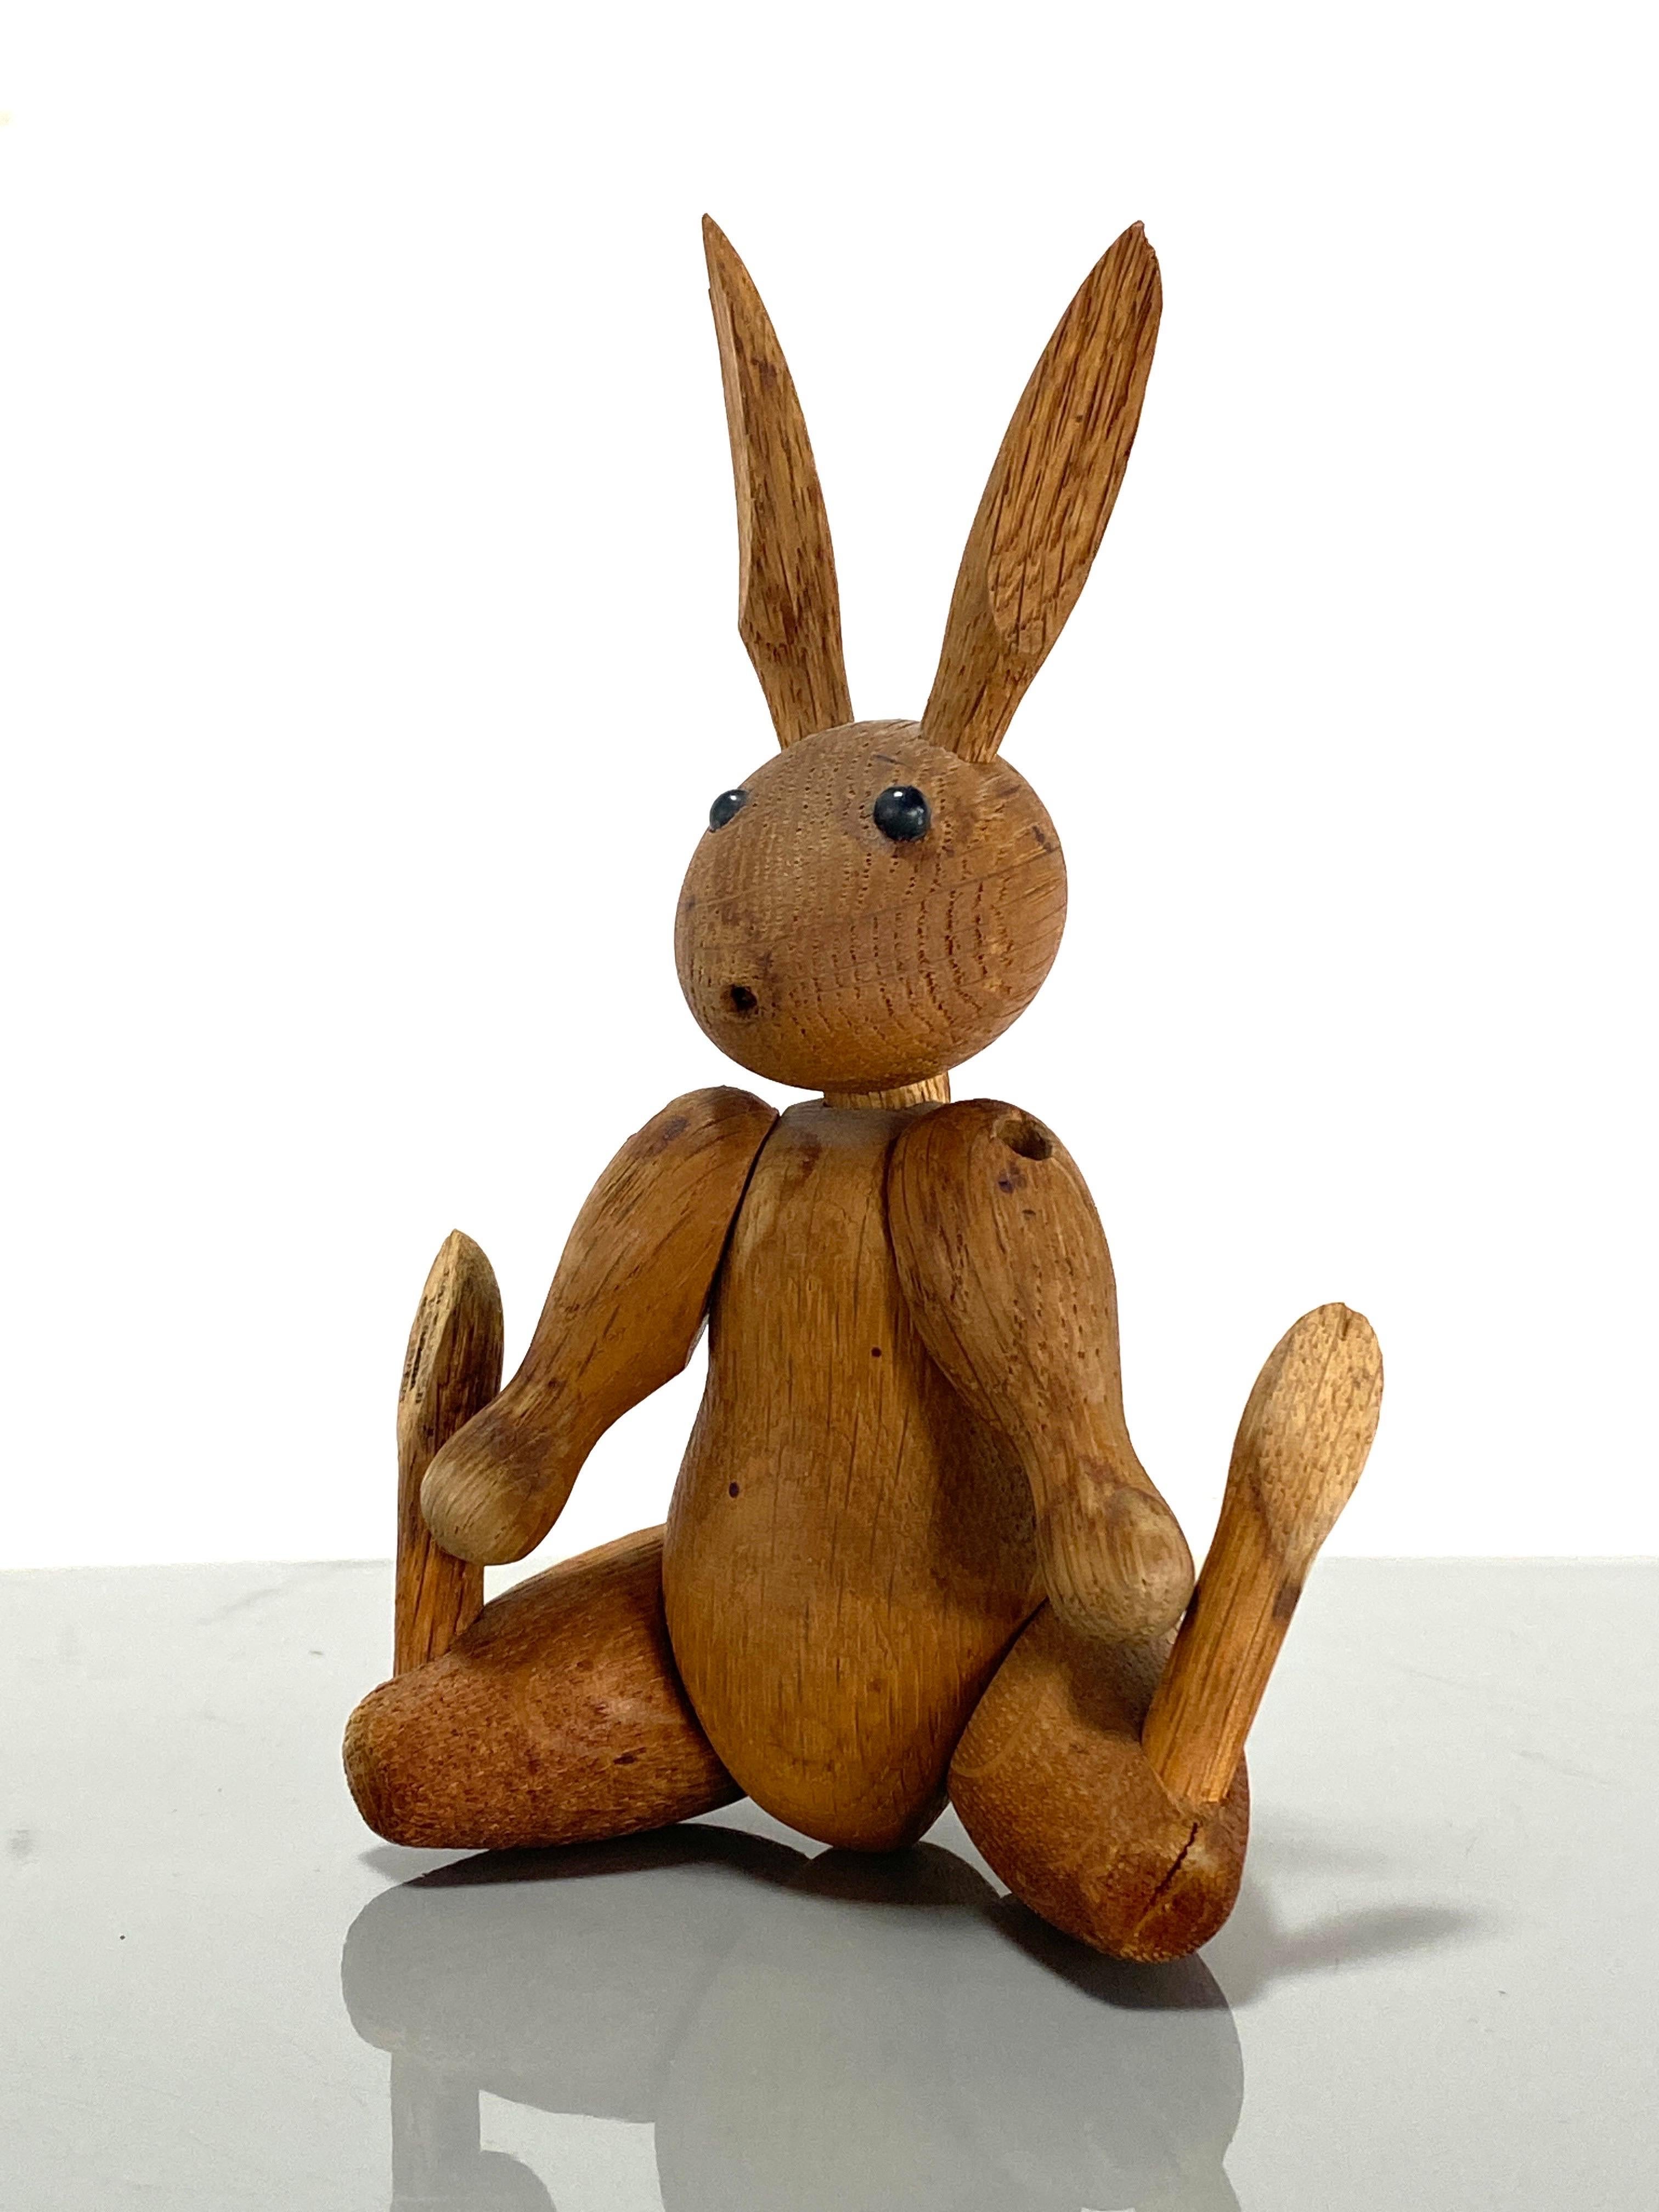 Mid-Century Modern Vintage Rabbit Figurine by Kay Bojesen, It Was Designed in 1957, This is an Exam